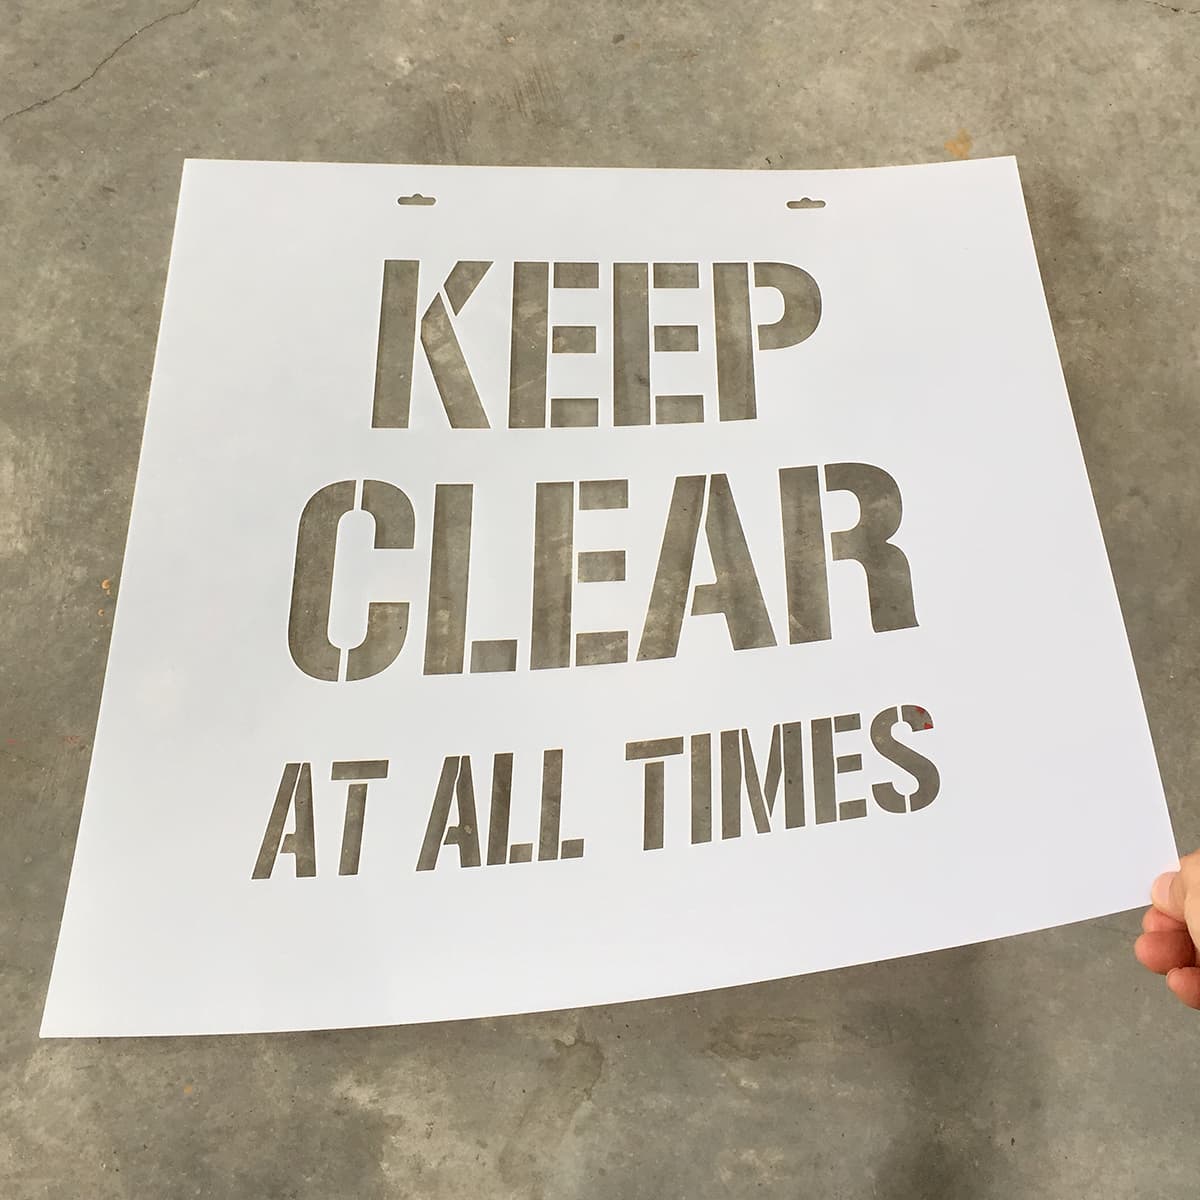 keep-clear-stencil-for-warehouse